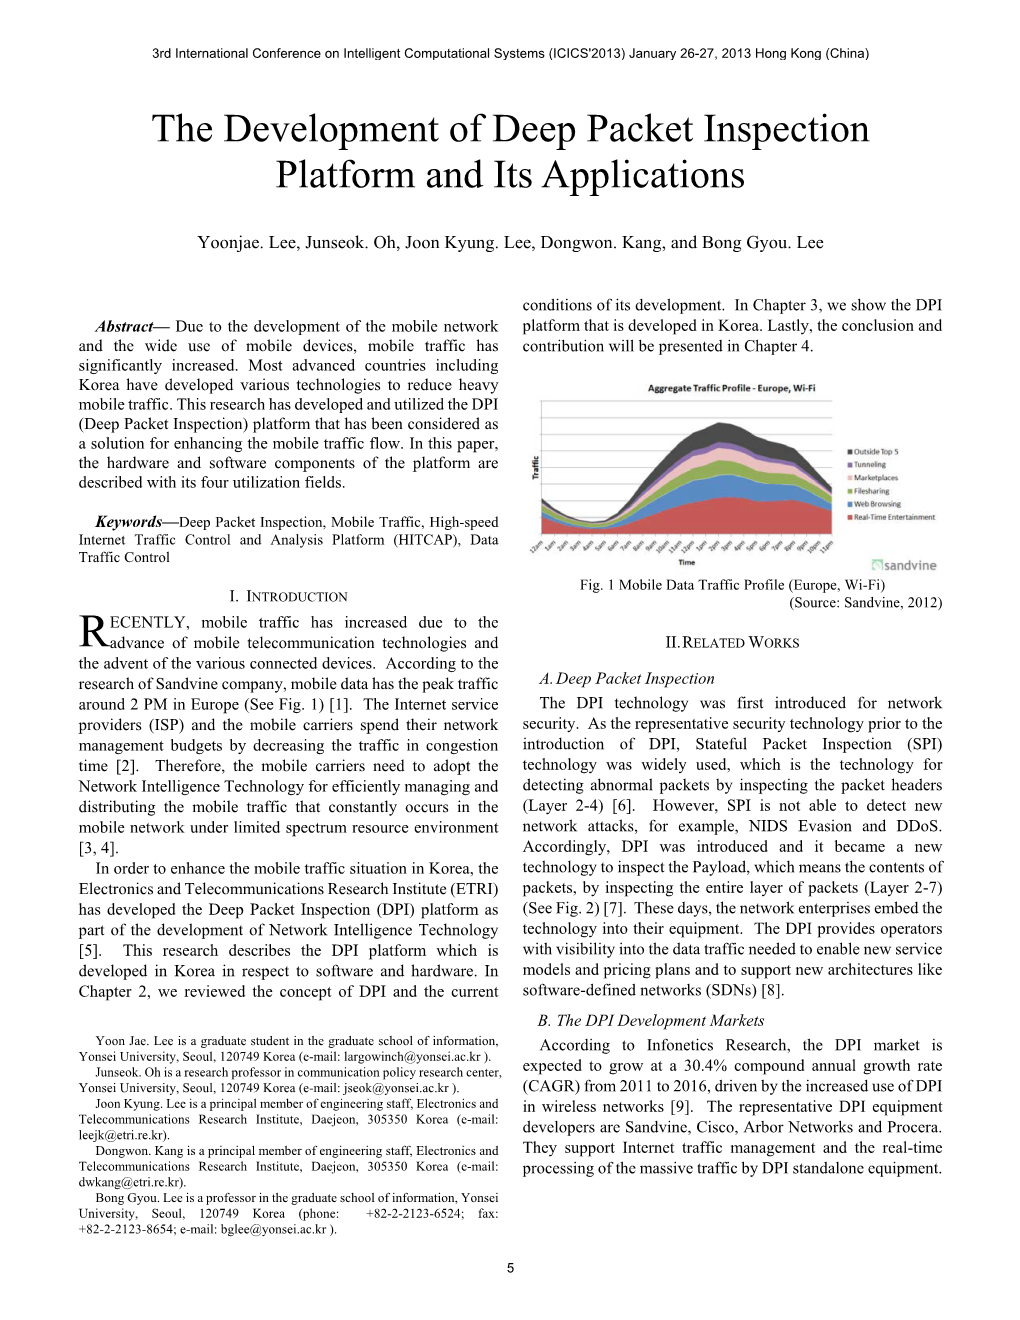 The Development of Deep Packet Inspection Platform and Its Applications